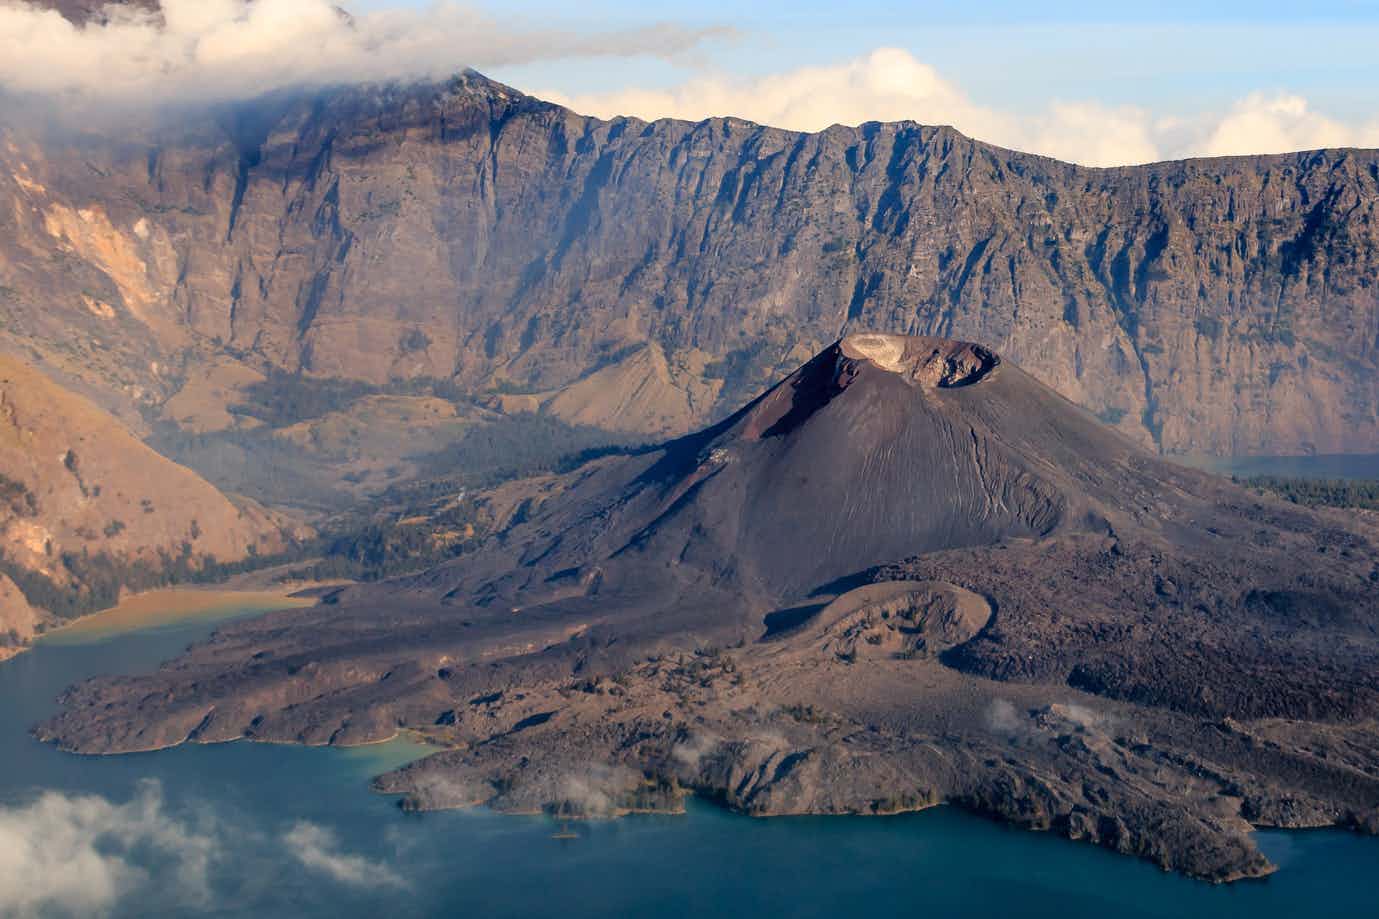 Crater rim, Mount Agung, Lombok, Indonesia. Photo: Getty-537925961